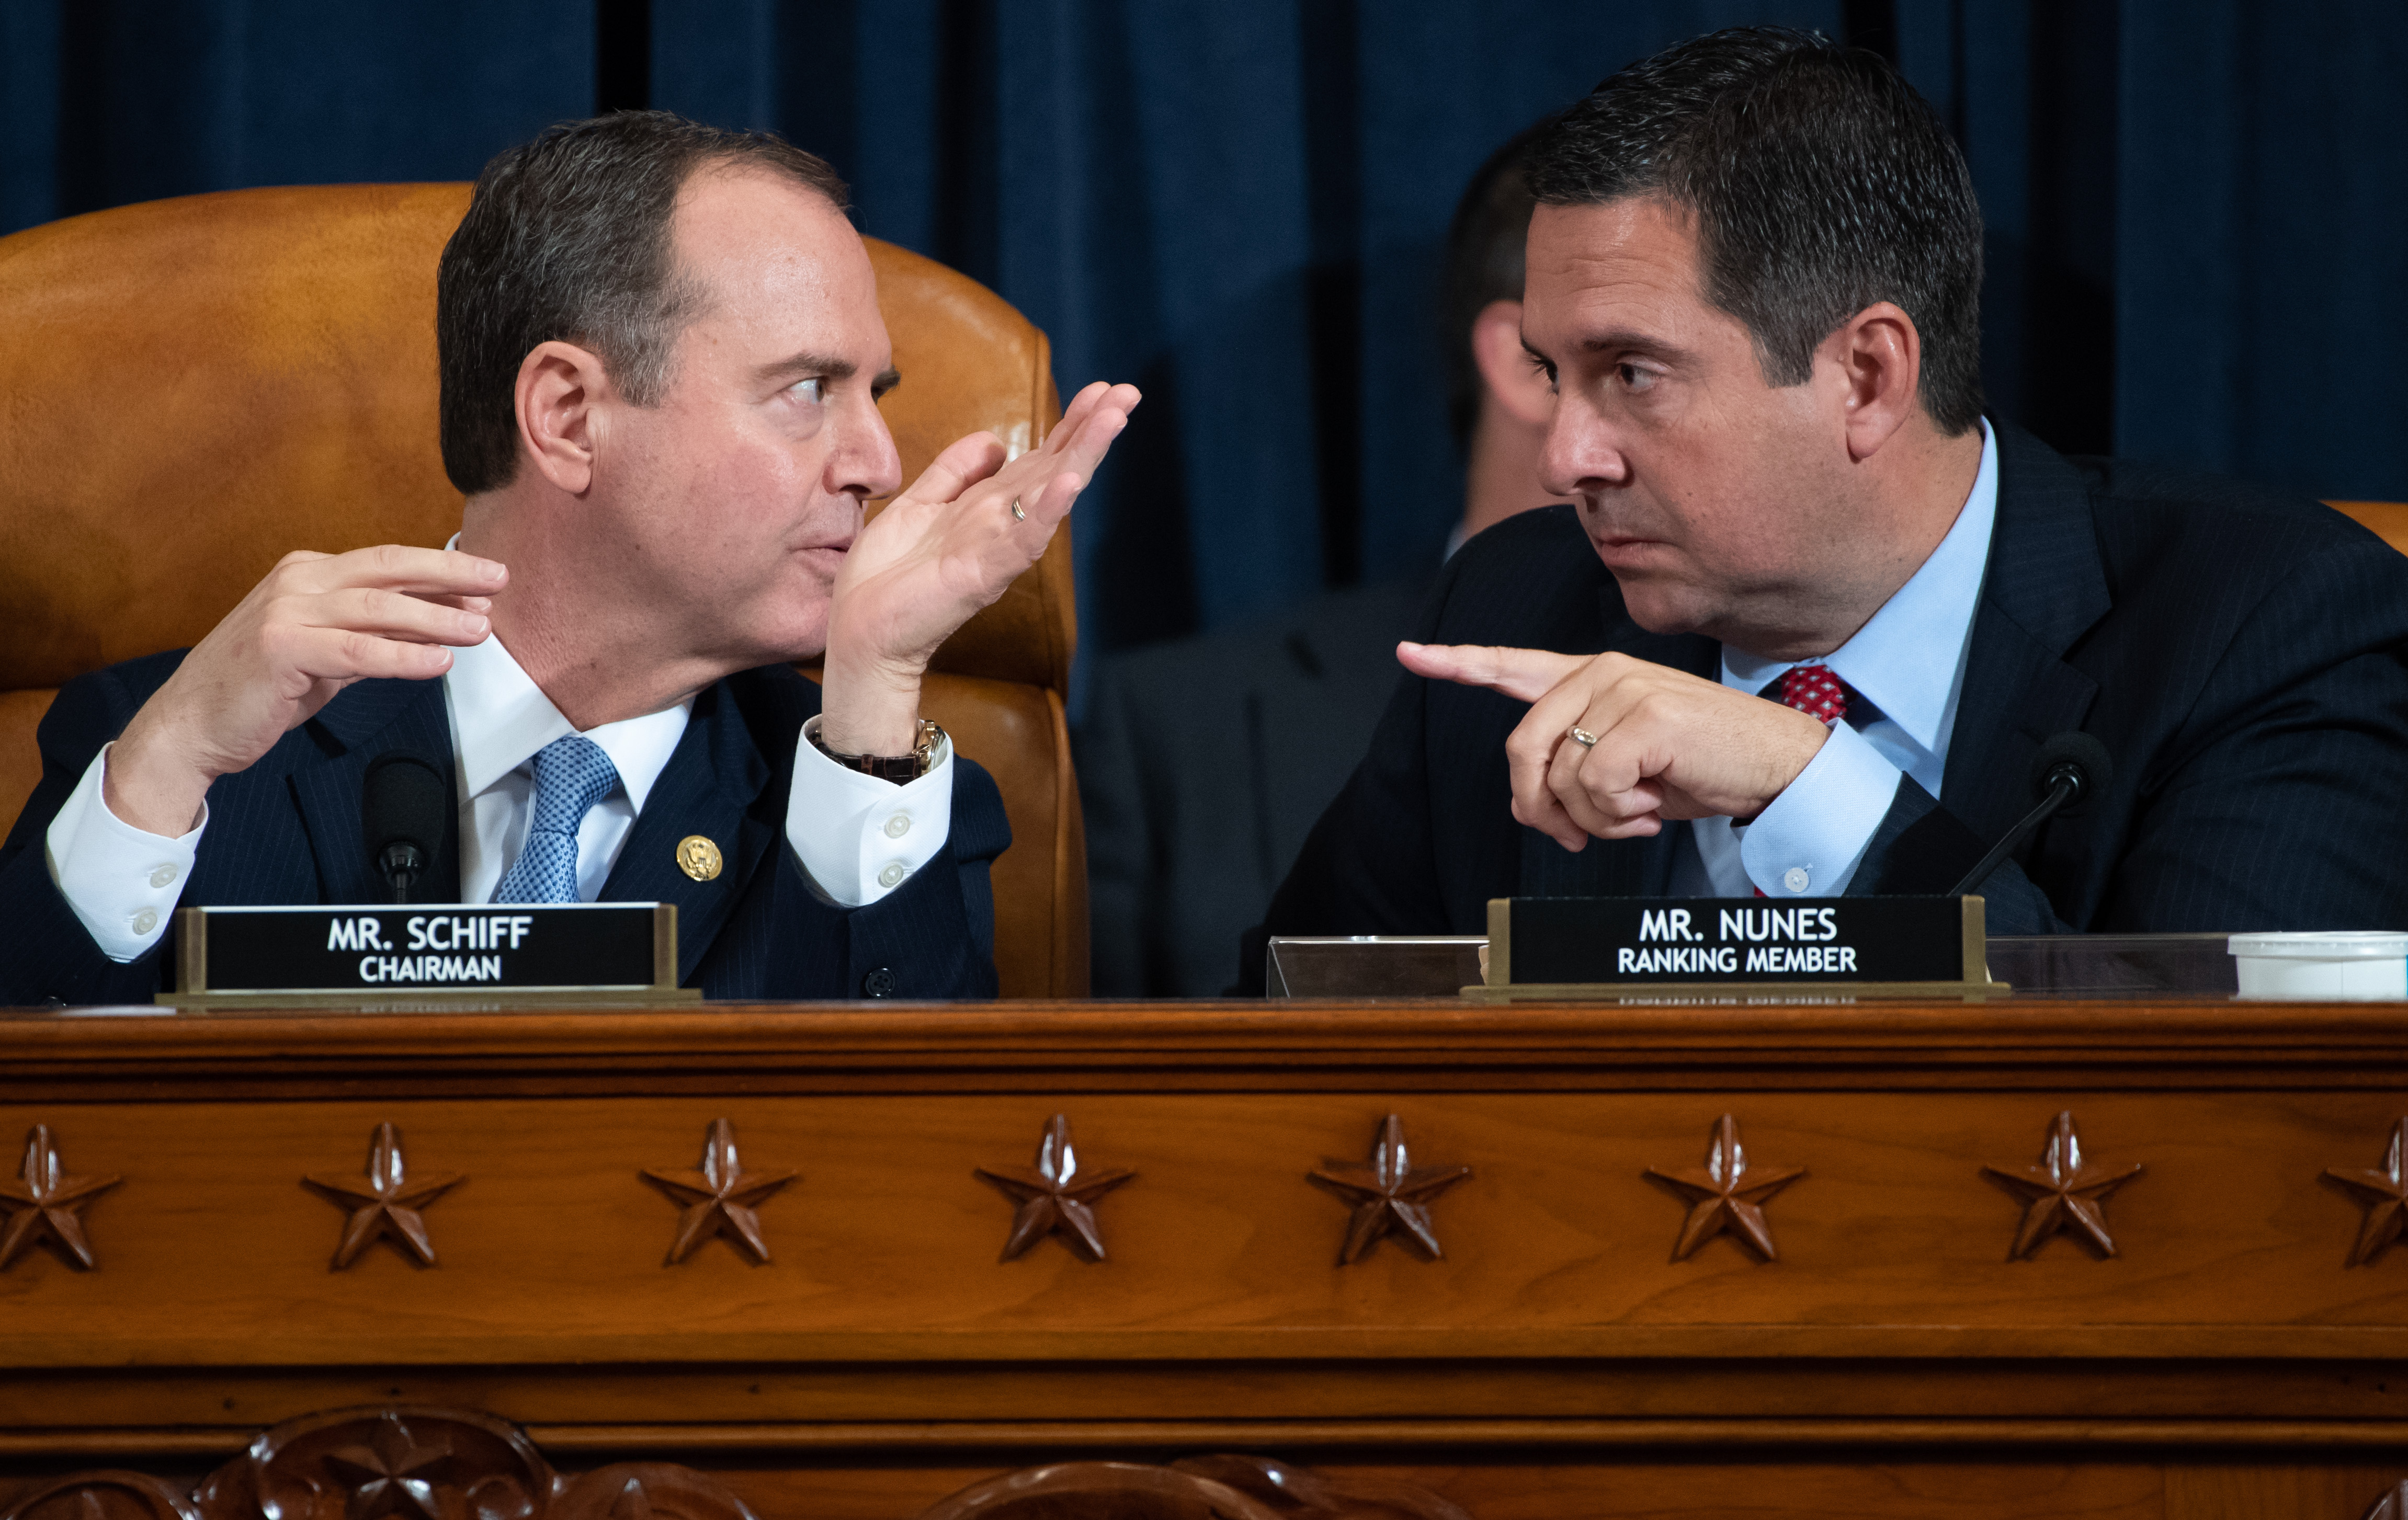 Chairman Adam Schiff (L), Democrat of California, and Ranking Member Devin Nunes (R), Republican of California, during the first public hearings held by the House Permanent Select Committee on Intelligence as part of the impeachment inquiry into US President Donald Trump. (SAUL LOEB/POOL/AFP via Getty Images)